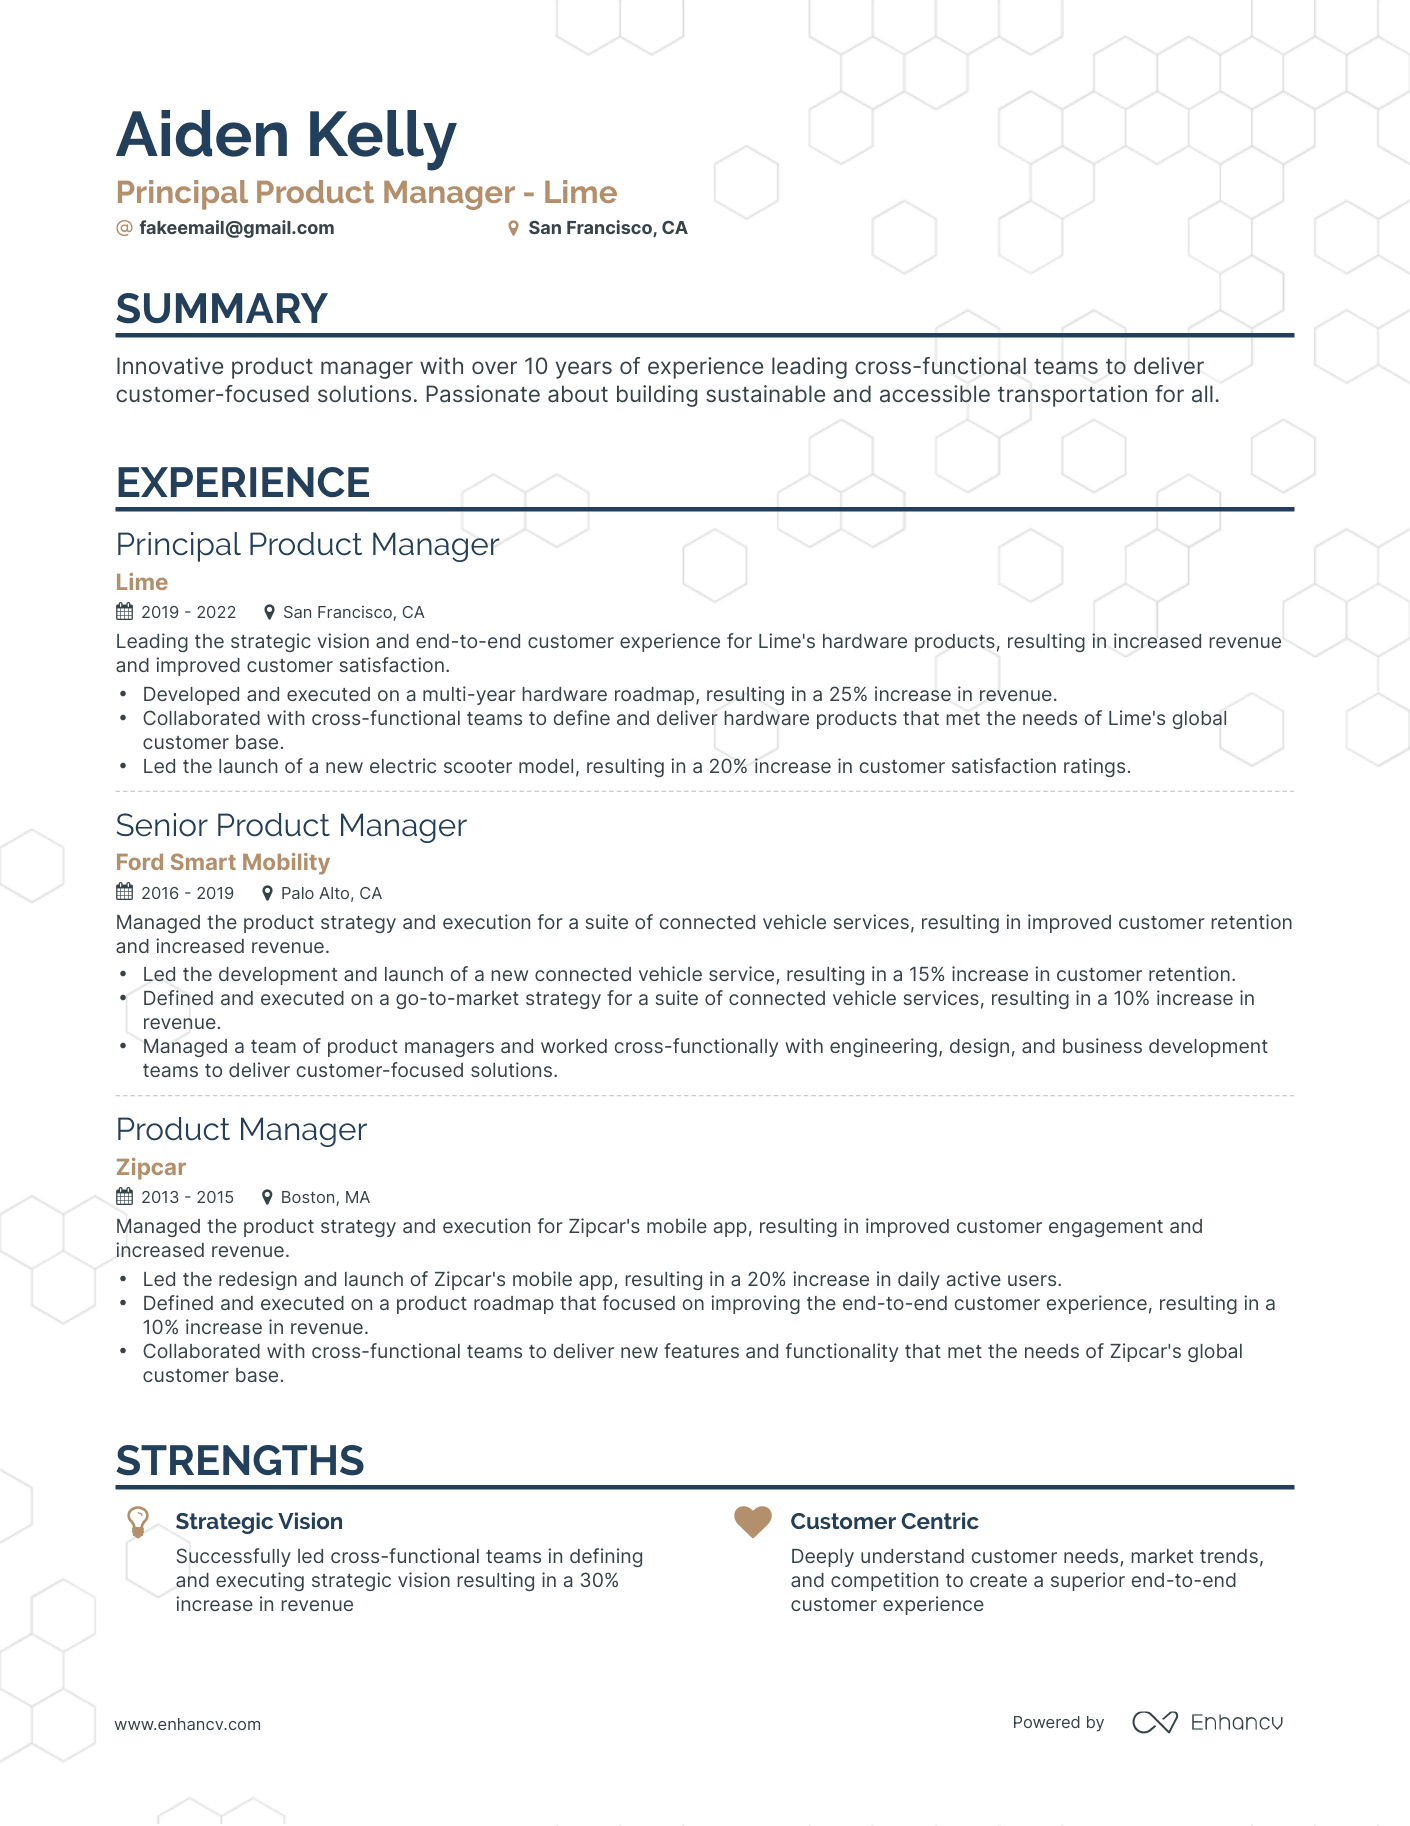 Classic Principal Product Manager Resume Template